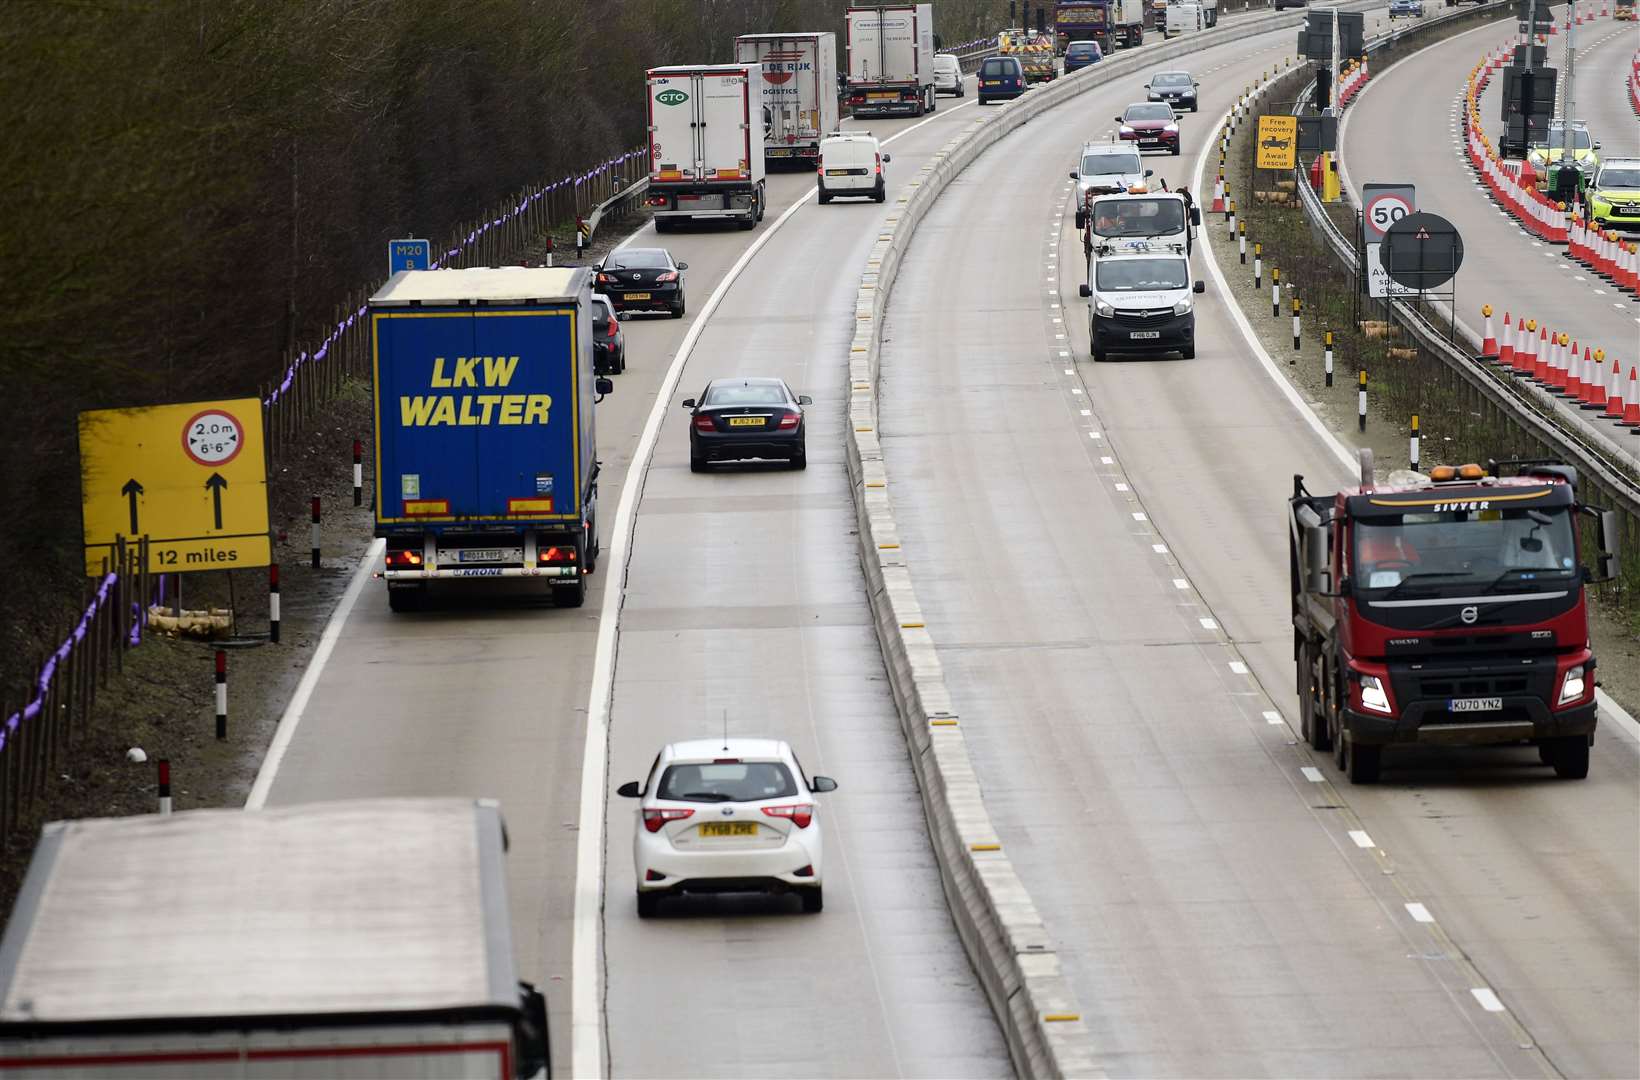 Motorists face a 50mph limit and narrow lanes in the contraflow. Picture: Barry Goodwin